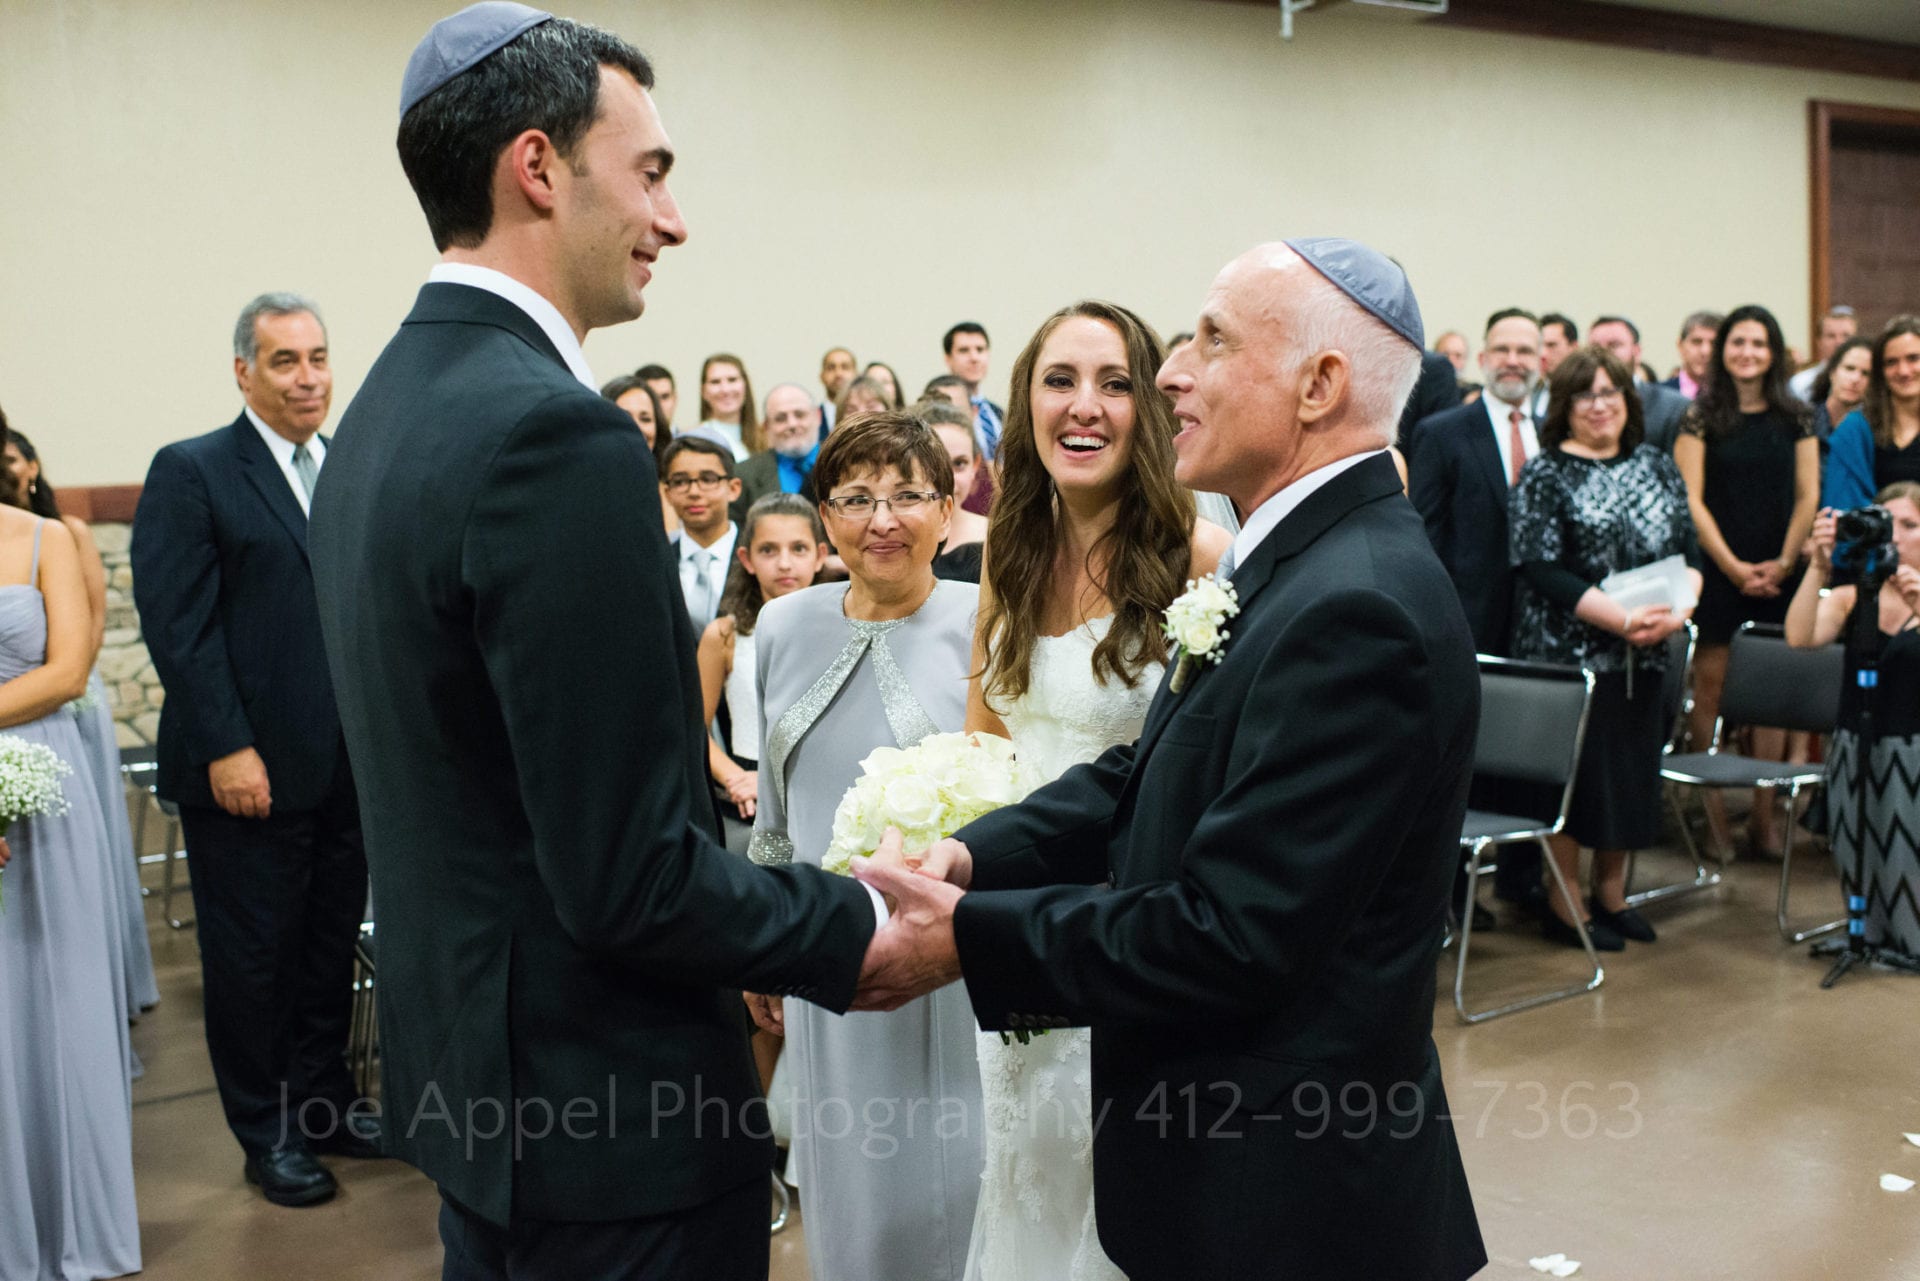 A groom shakes hands with the father of the bride as he presents his daughter to the groom.